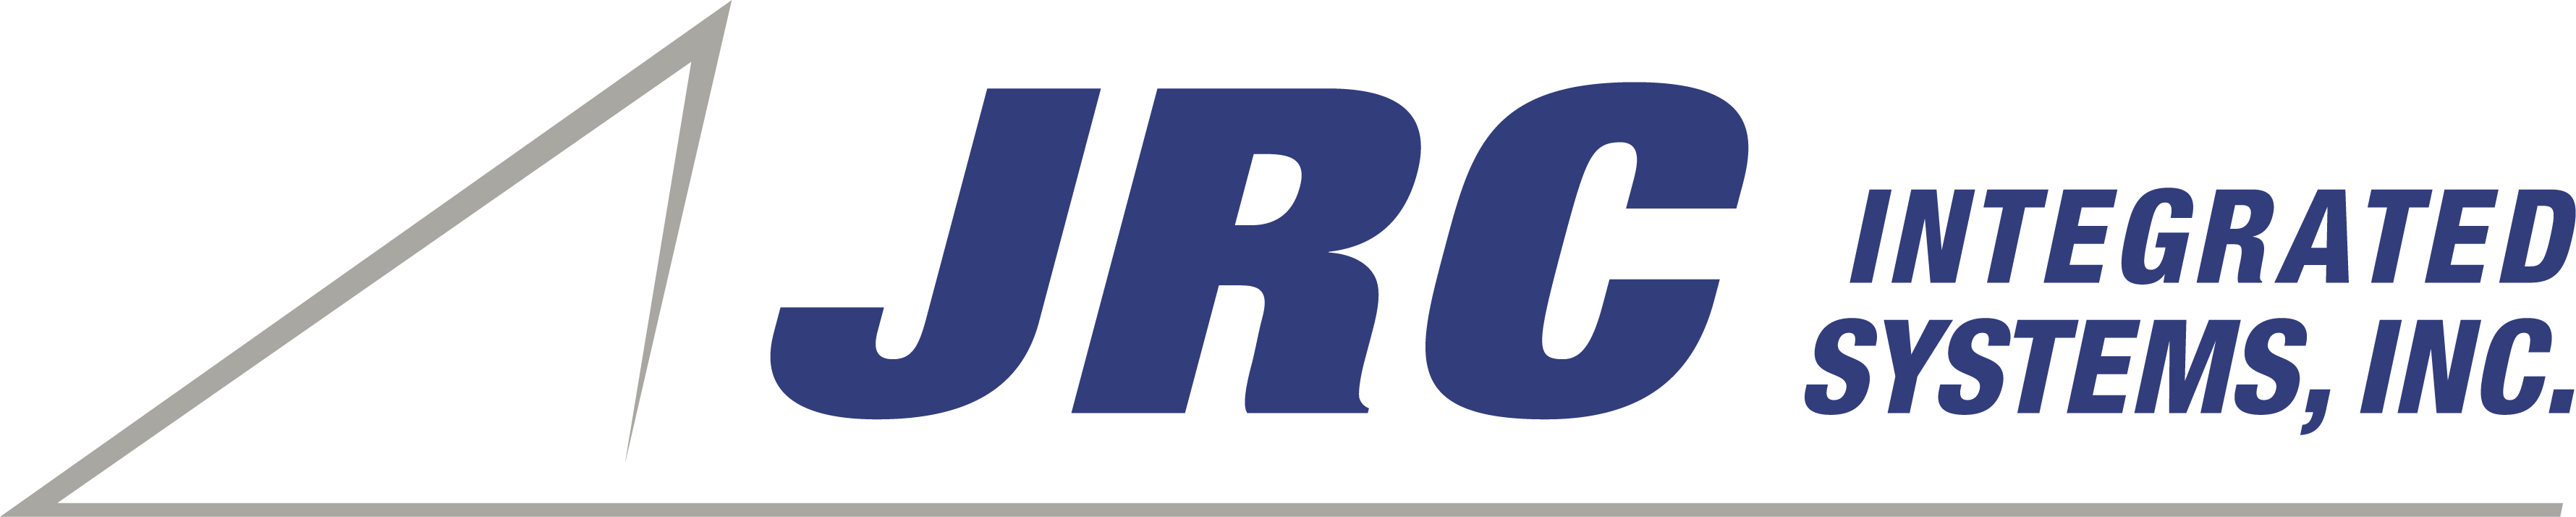 JRC Integrated Systems, Inc logo